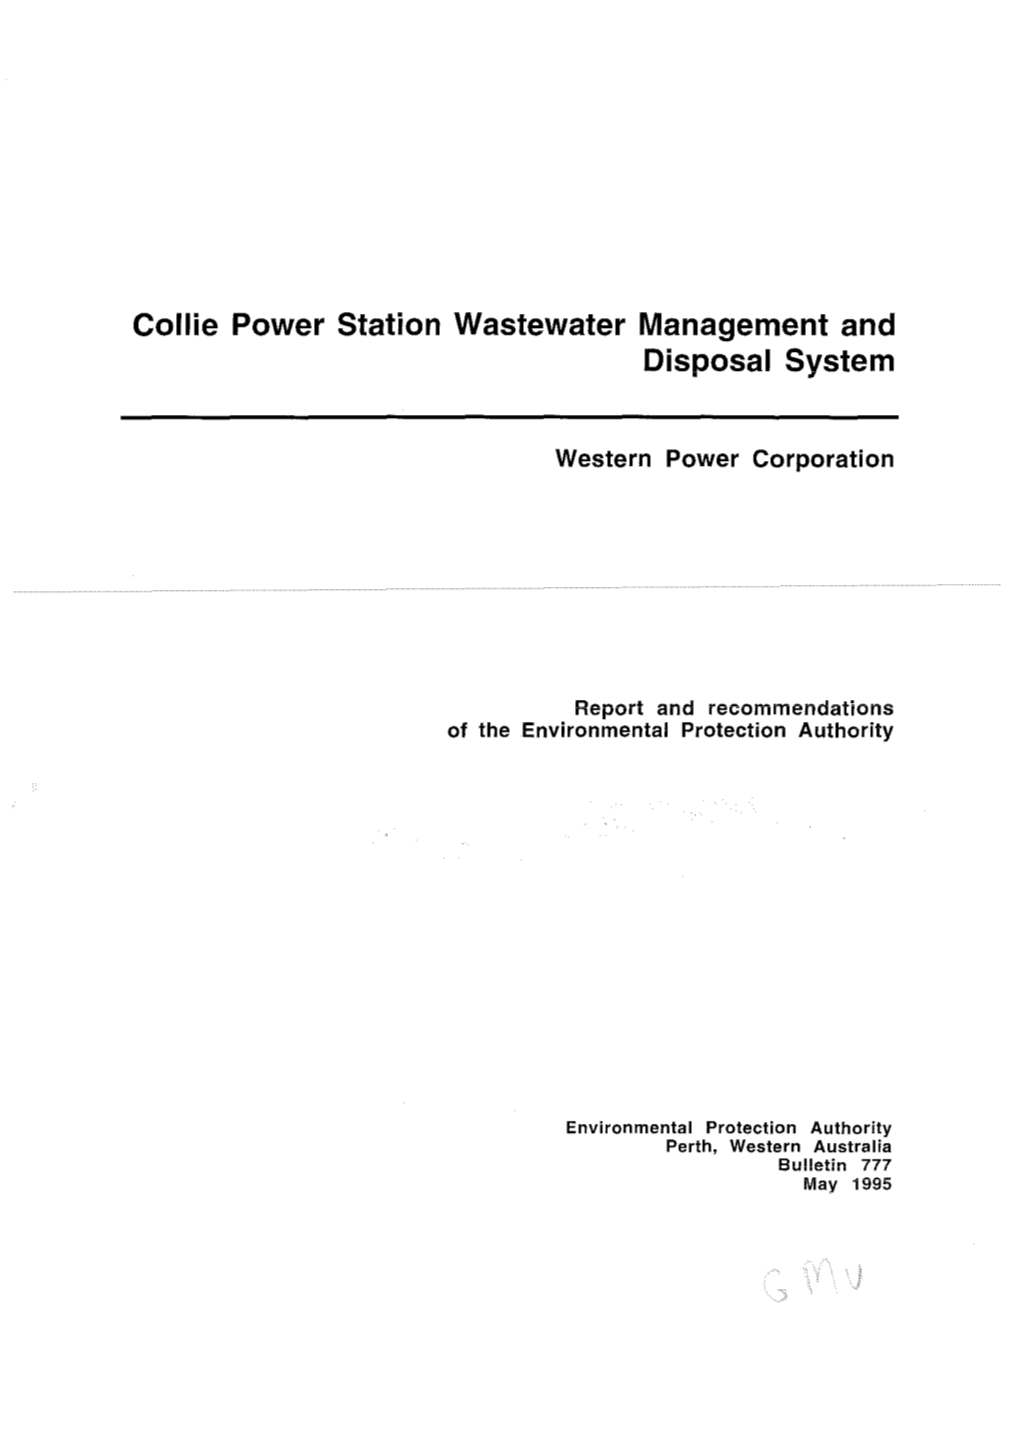 Collie Power Station Wastewater Management and Disposal System